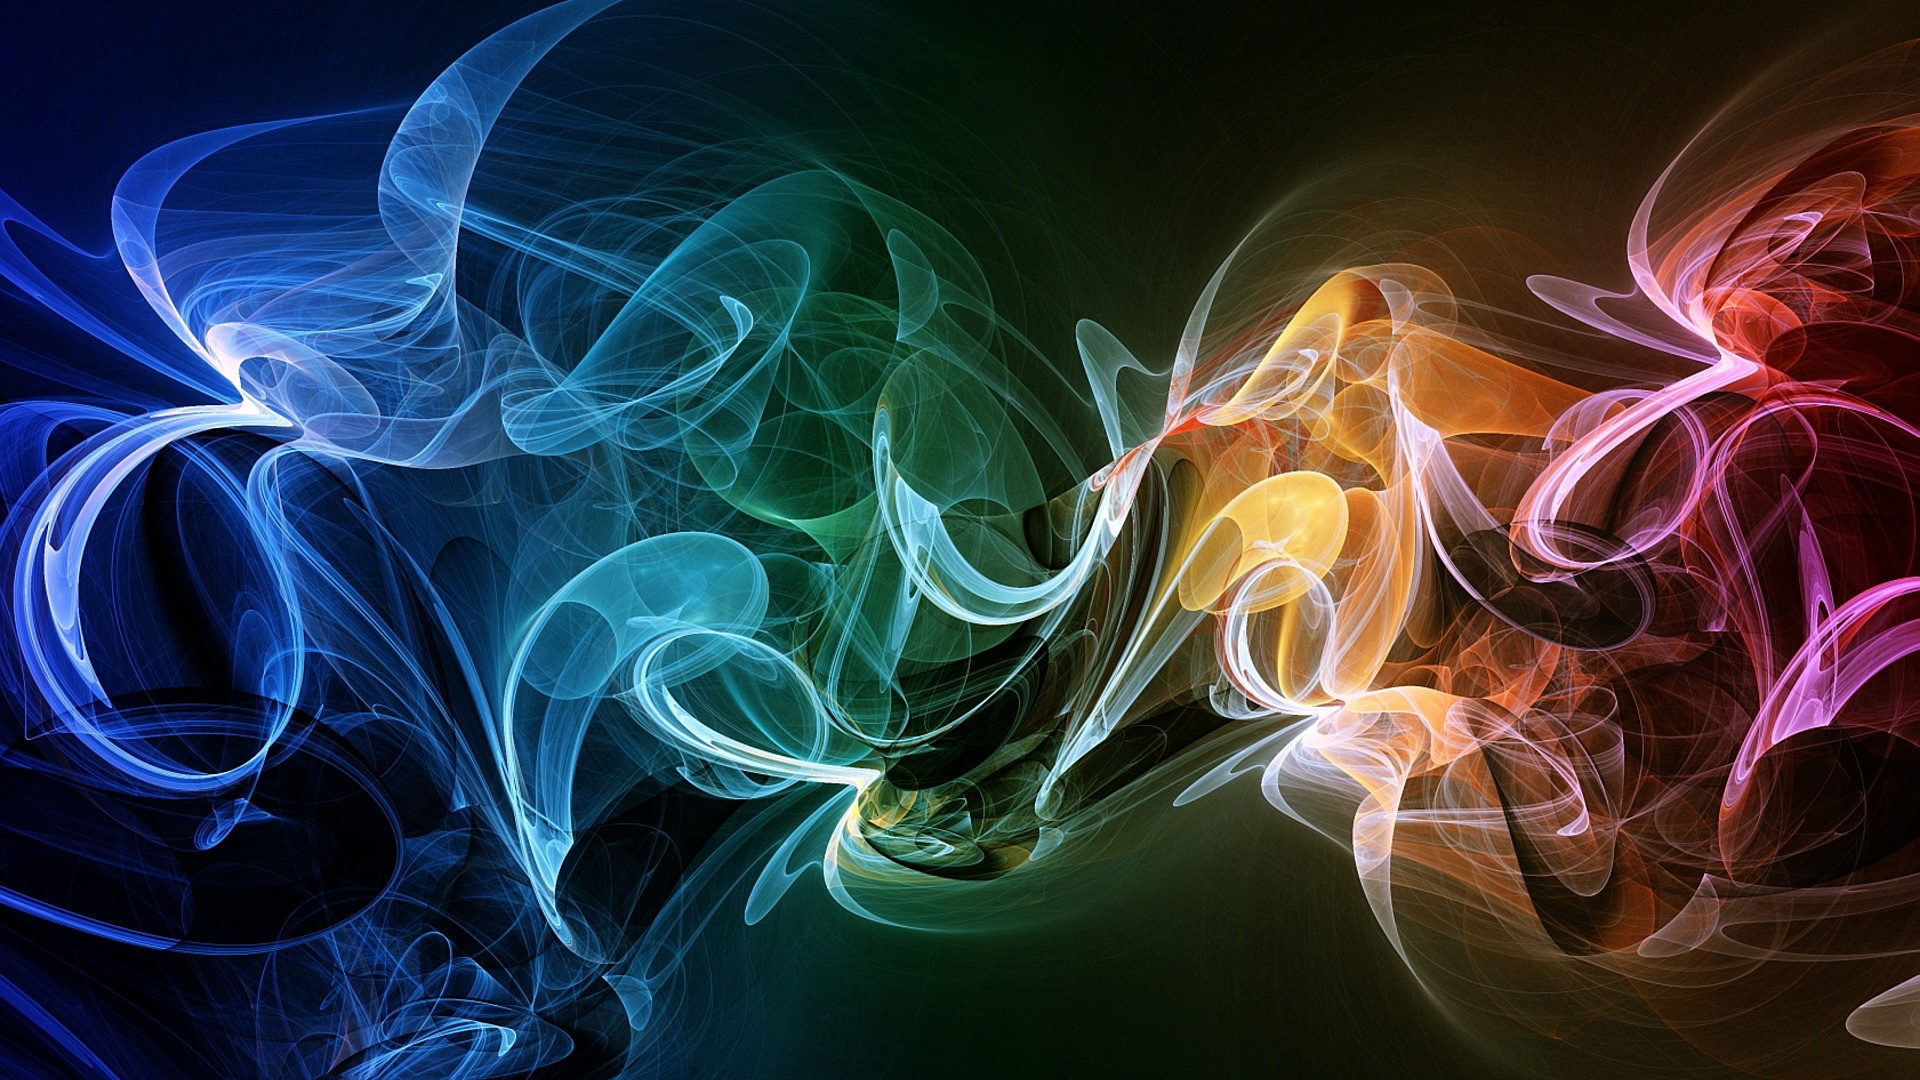 Abstract Colorful Smoke Art | Download HD Wallpapers